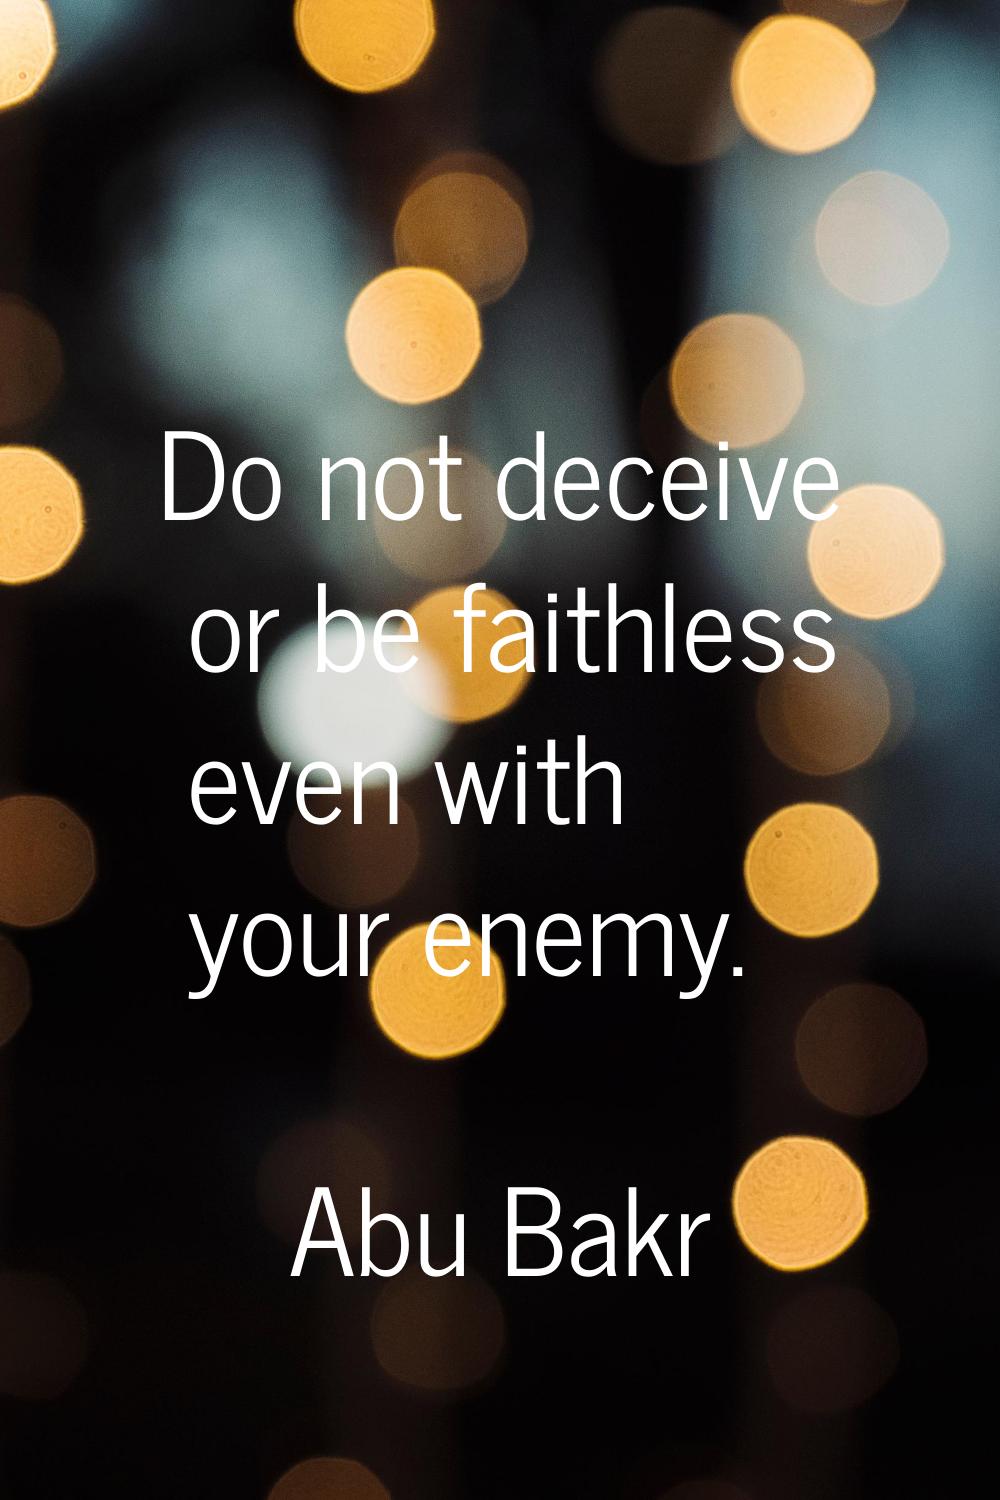 Do not deceive or be faithless even with your enemy.